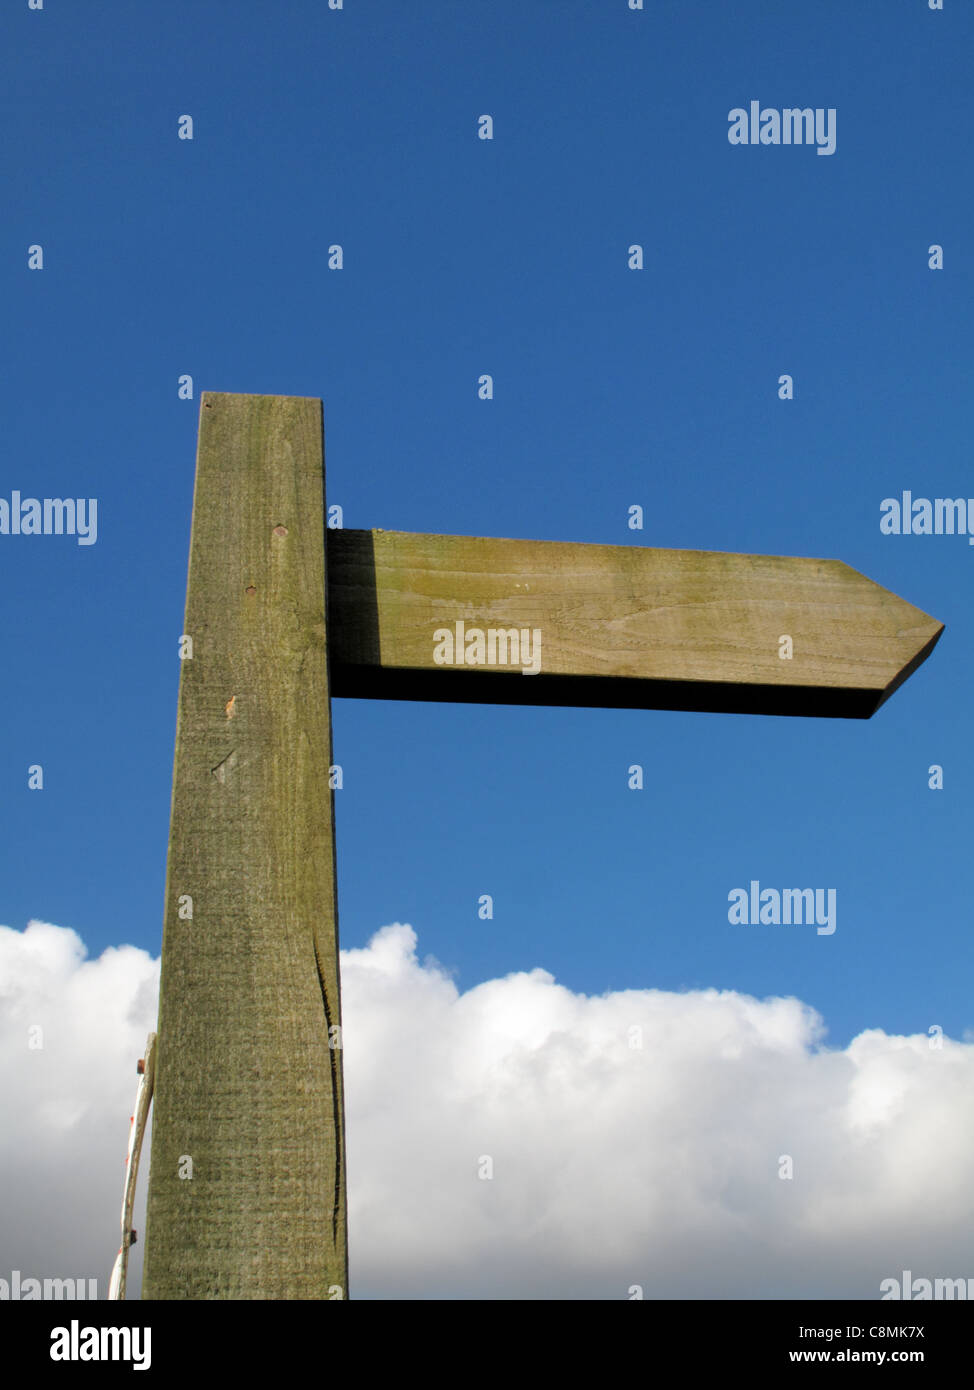 An blank wooden signpost against a blue sky with a bank of clouds. Stock Photo